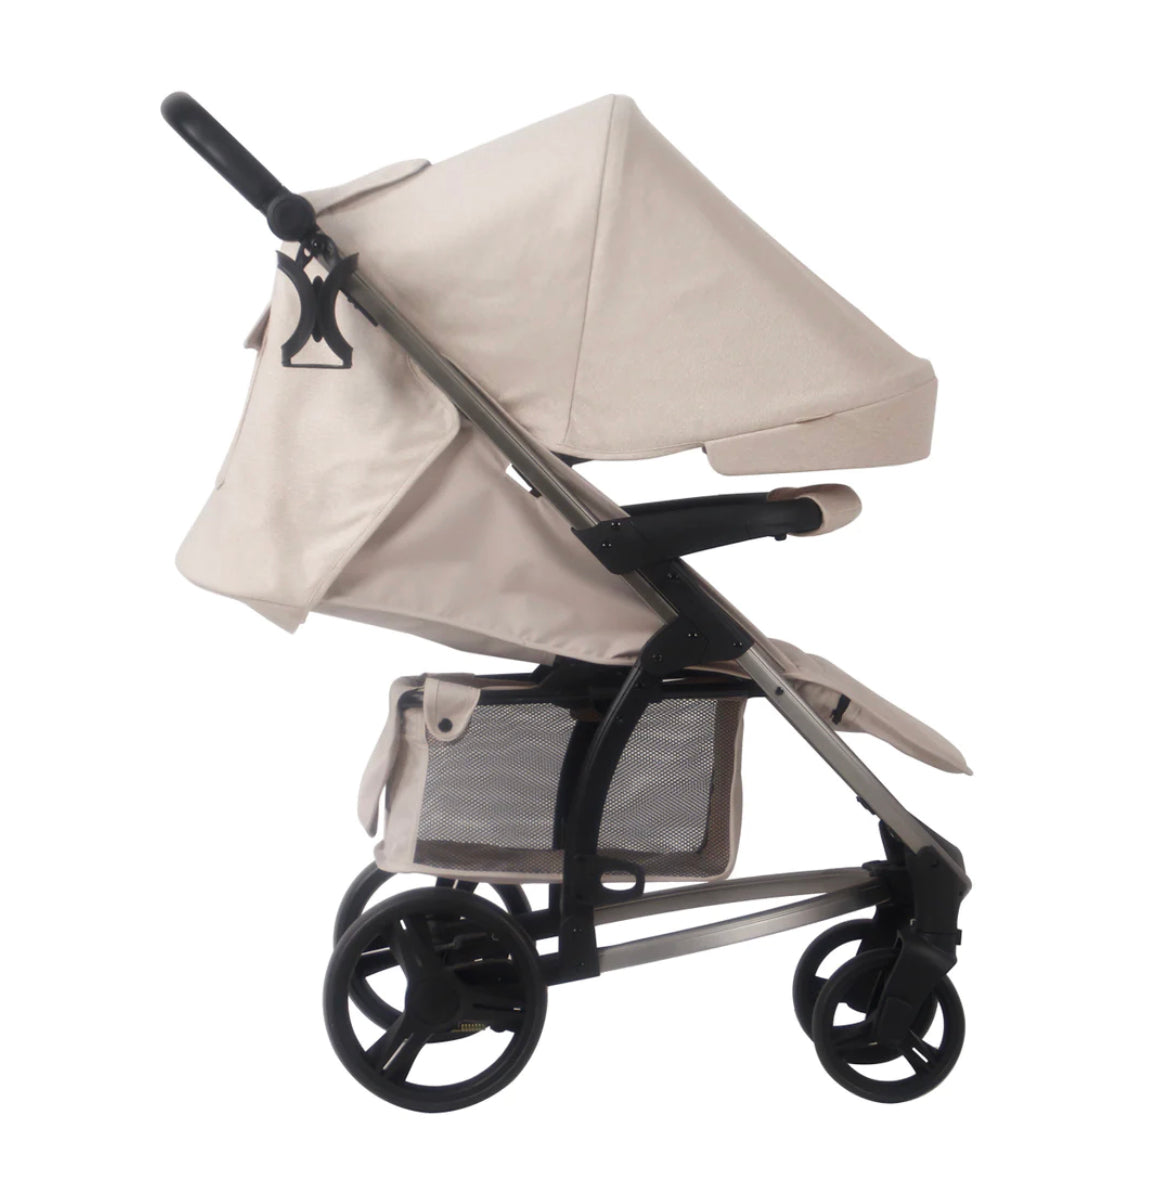 MB200i Billie Faiers Oatmeal iSize Travel System